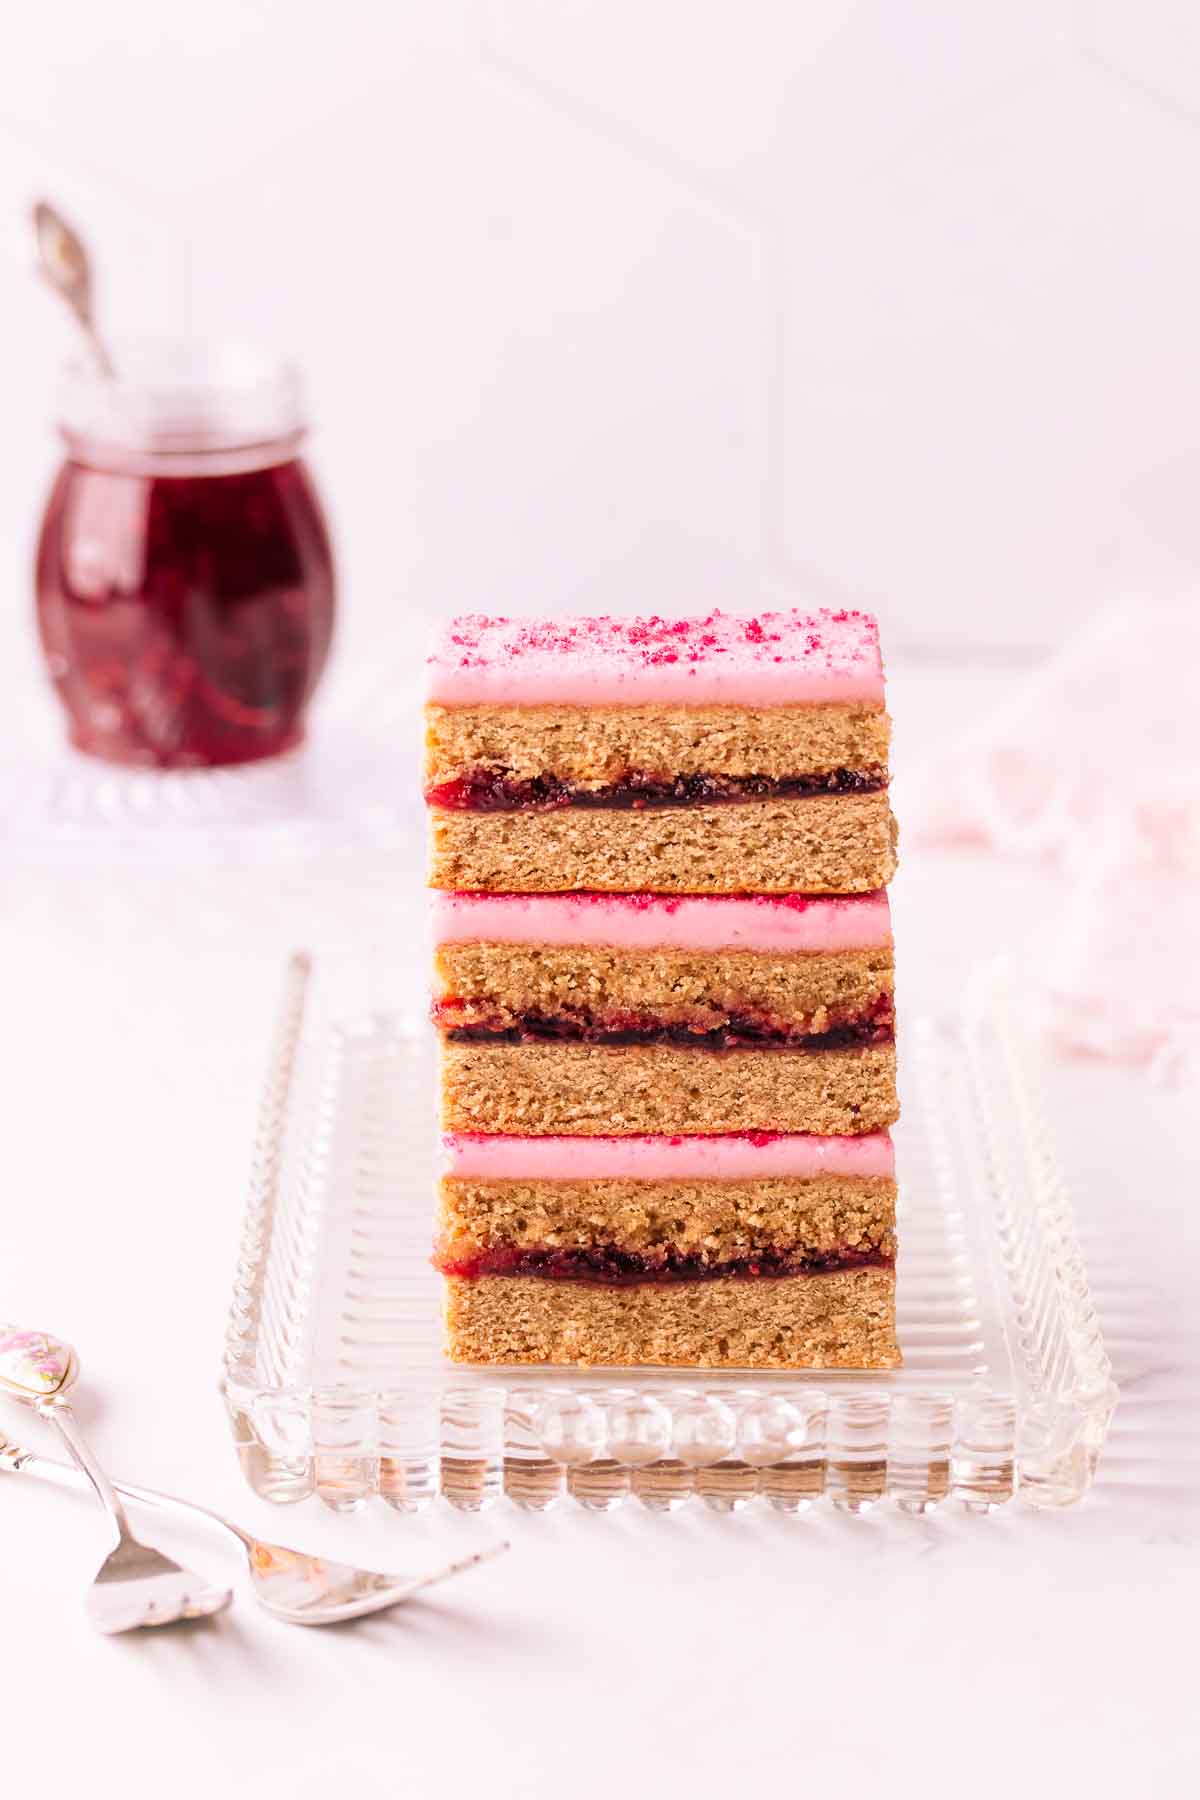 Three stacked pieces of Belgian slice on a rectangular glass plate, with a small jar of raspberry jam in the background and two cake forks in the foreground.